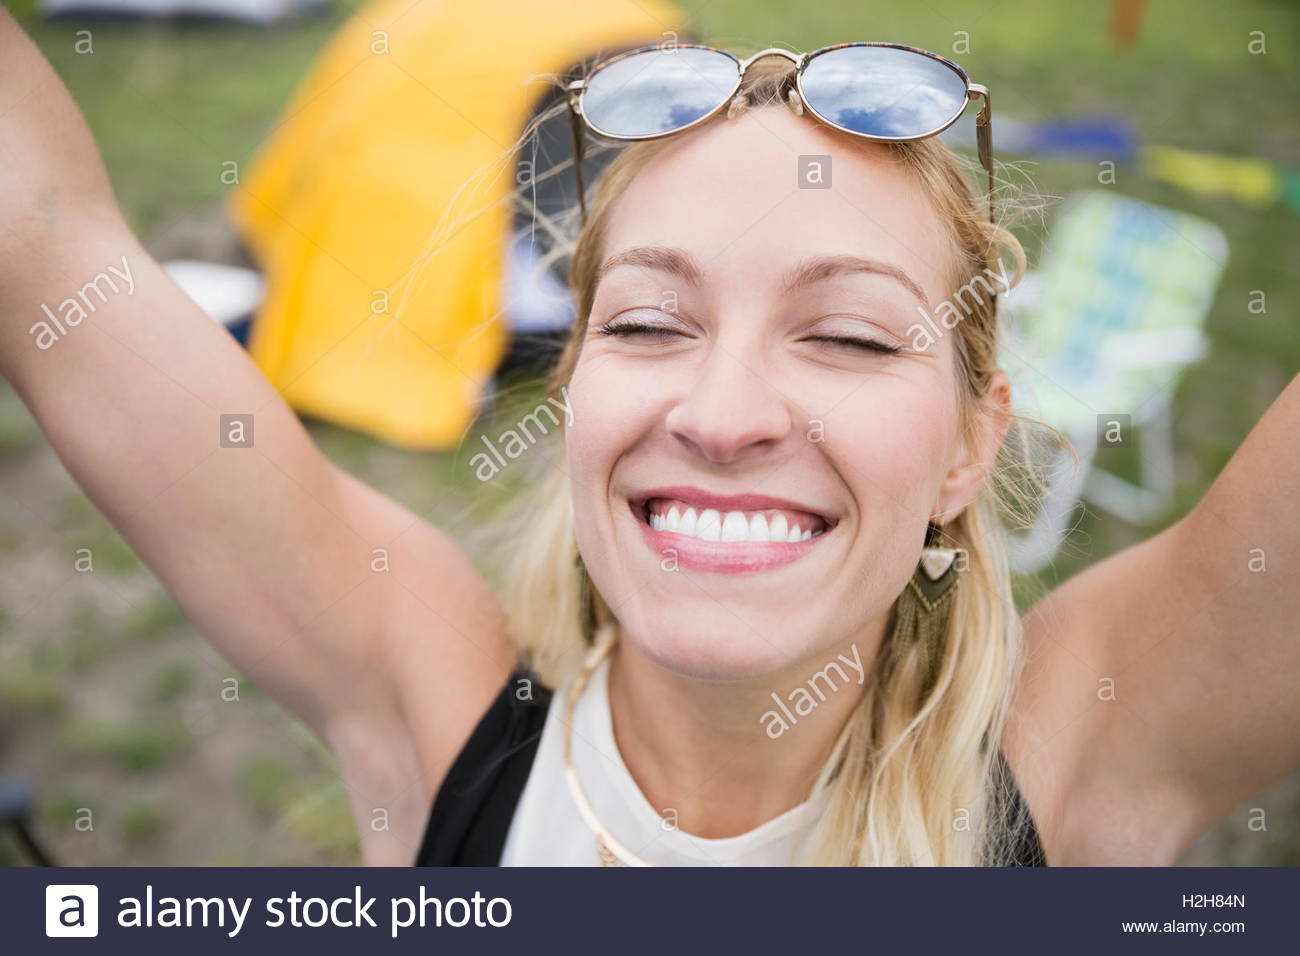 Portrait enthusiastic young woman with arms raised and eyes closed Stock Photo